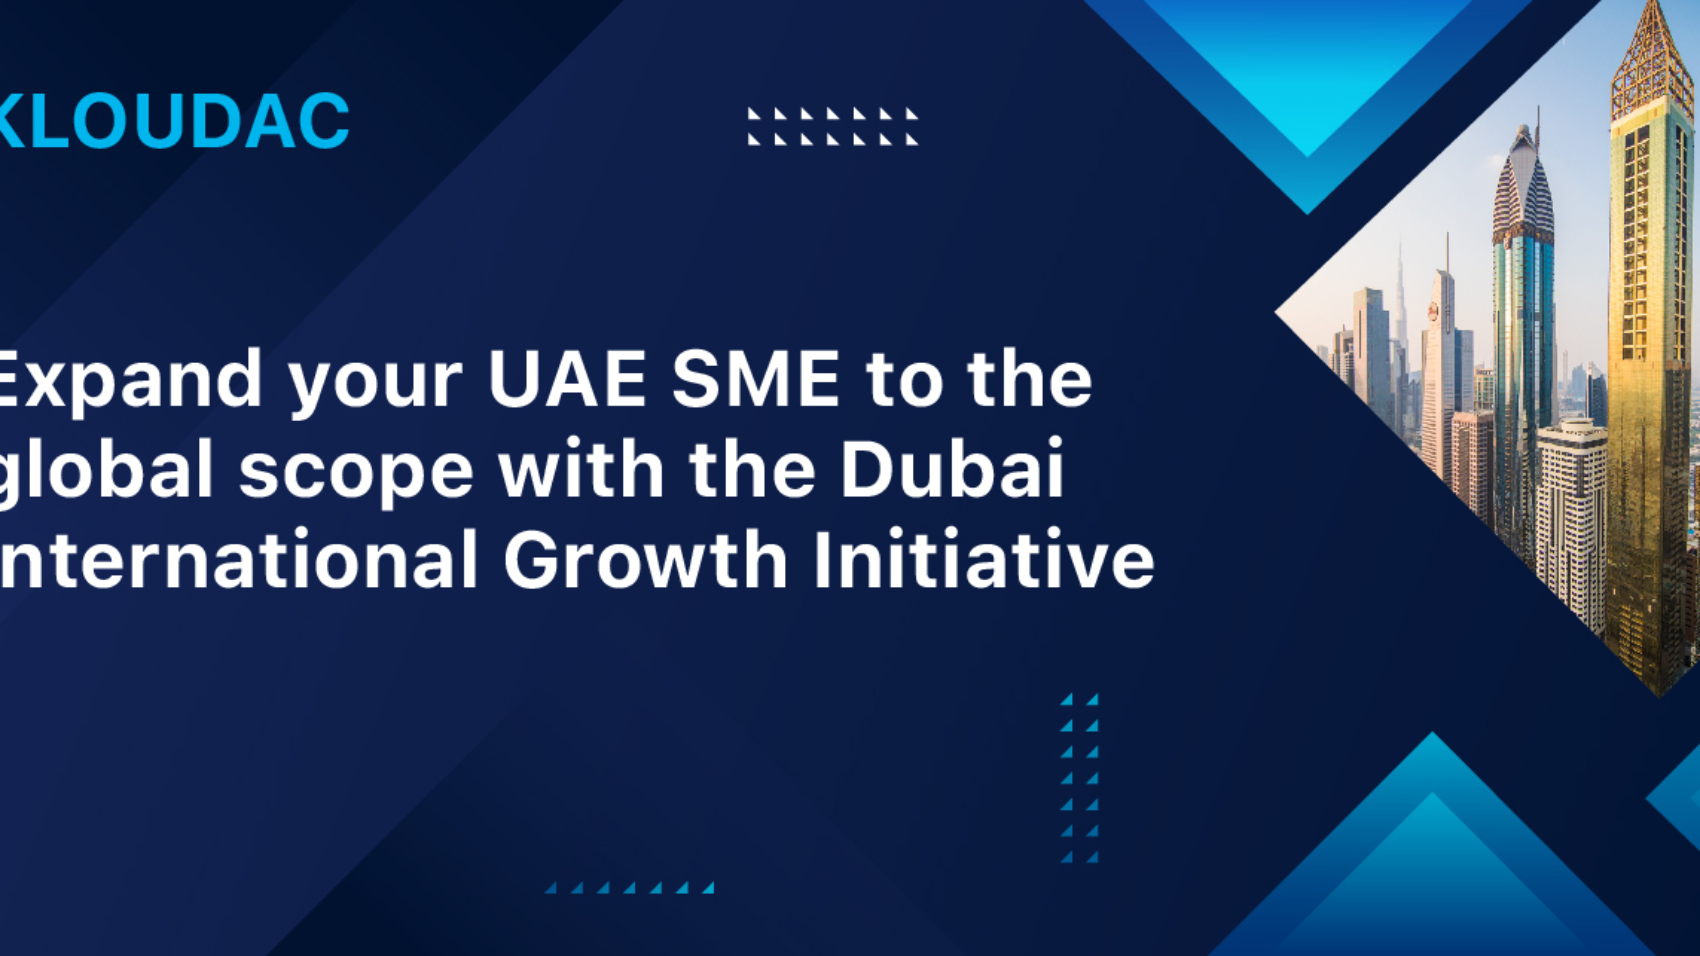 Expand your UAE SME to the global scope with the Dubai International Growth Initiative